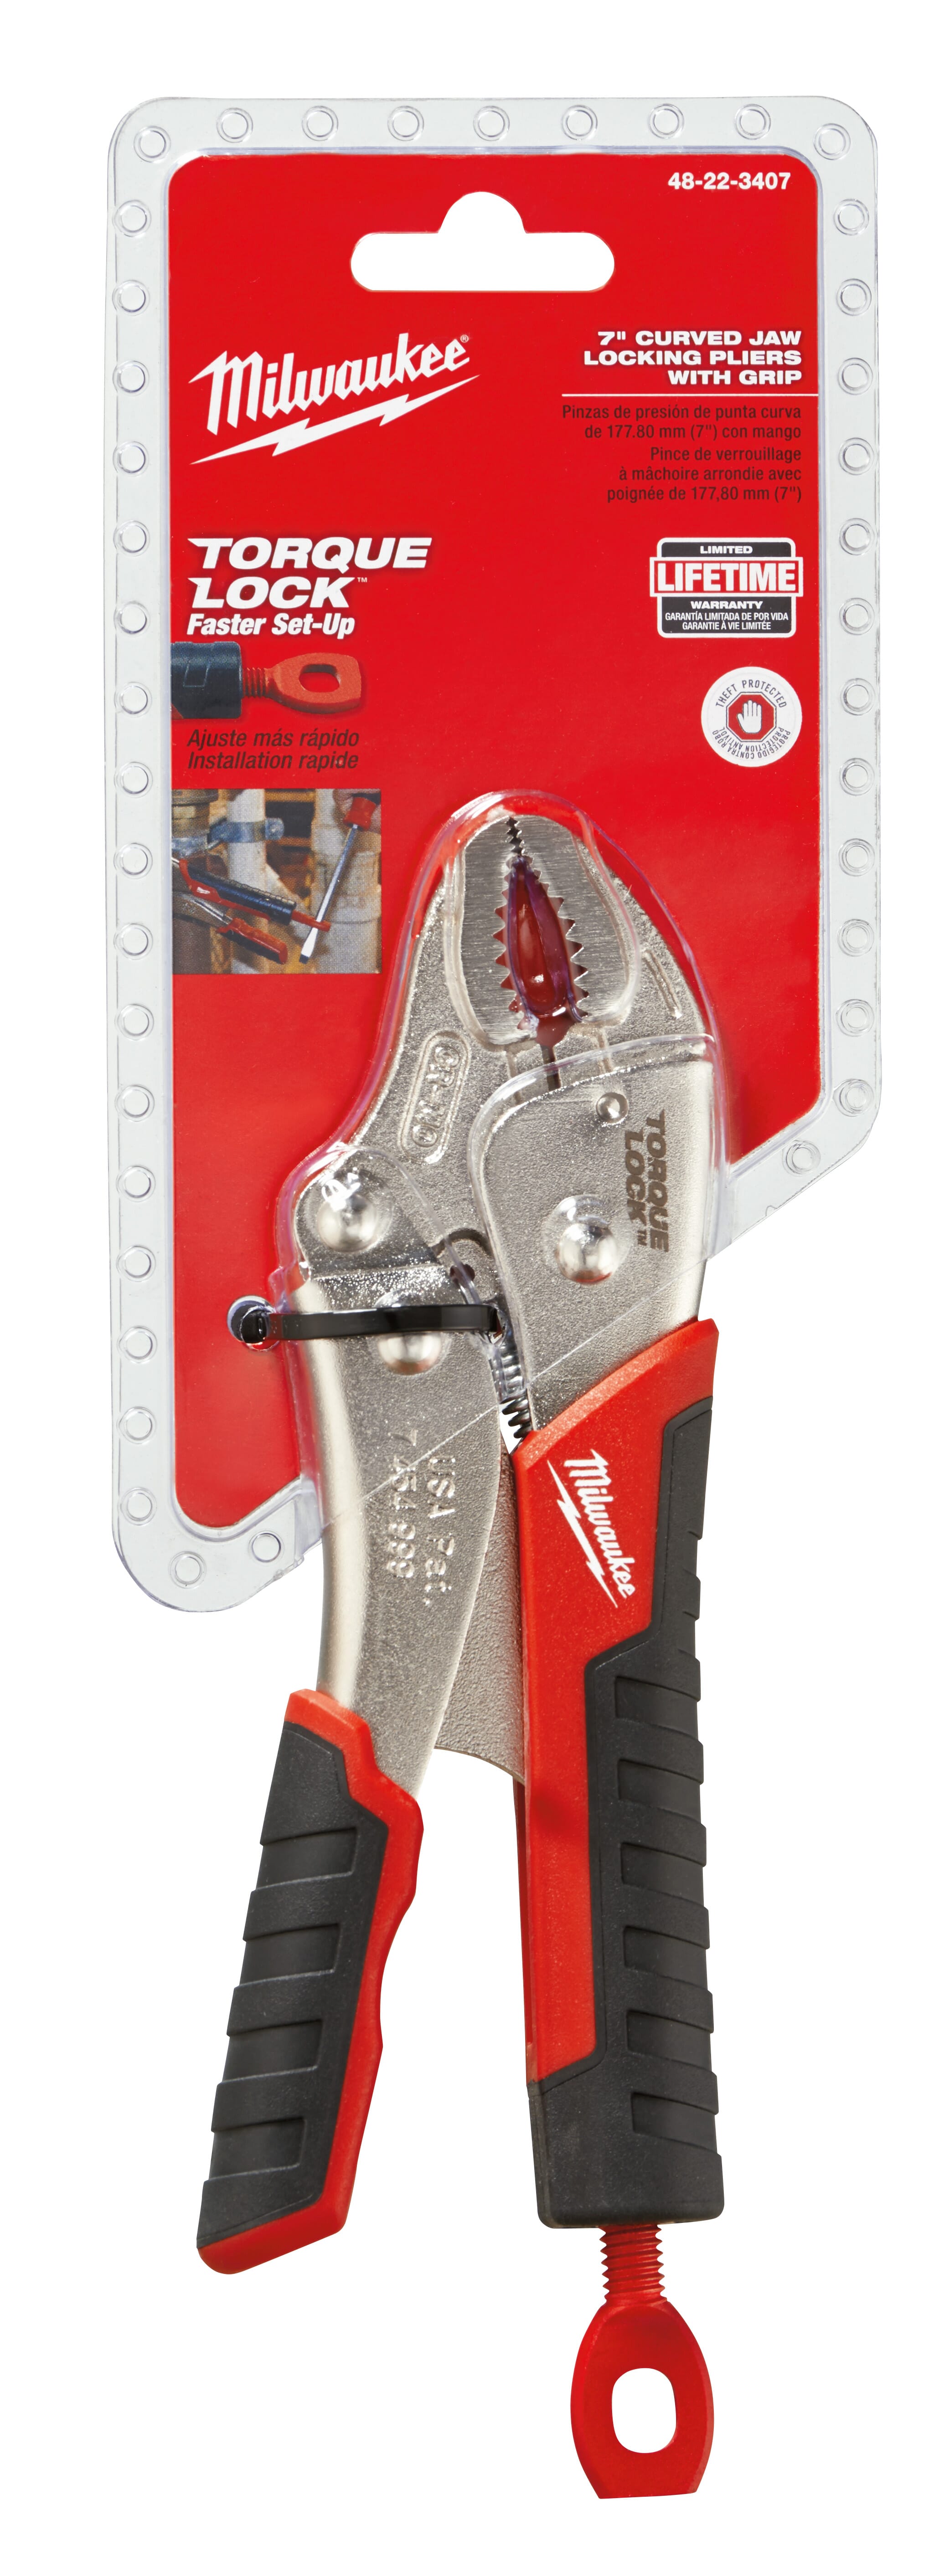 Milwaukee® TORQUE LOCK™ 48-22-3407 1-Handed Lever Locking Plier, 1 in Nominal, 1-5/64 in L x 13/32 in W x 13/32 in THK Alloy Steel Curved Jaw, 7 in OAL